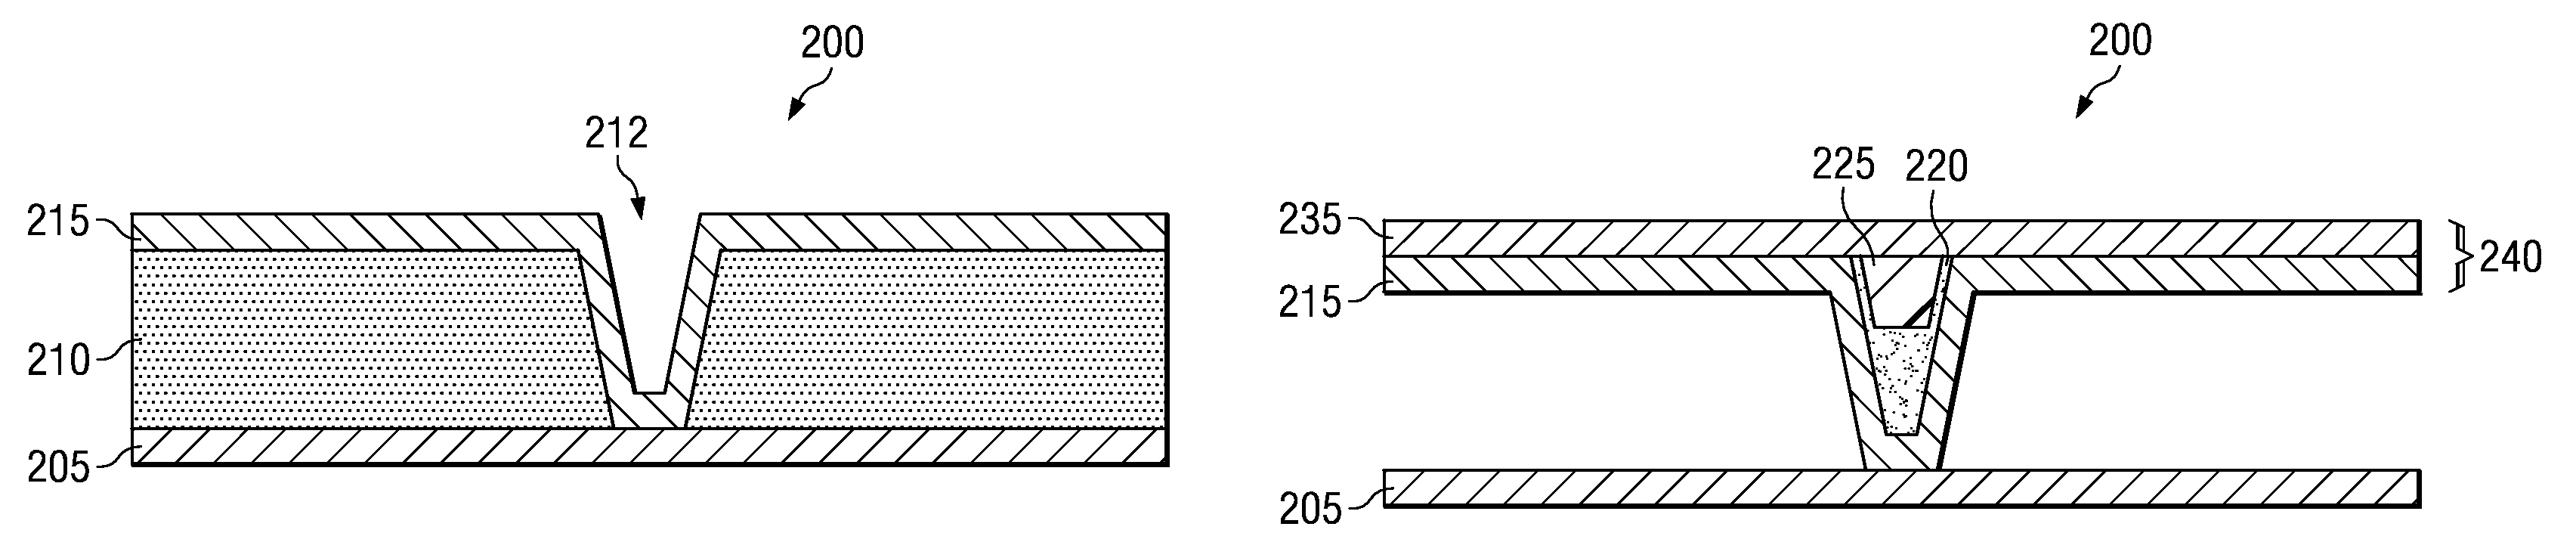 System and method for increasing image quality in a display system